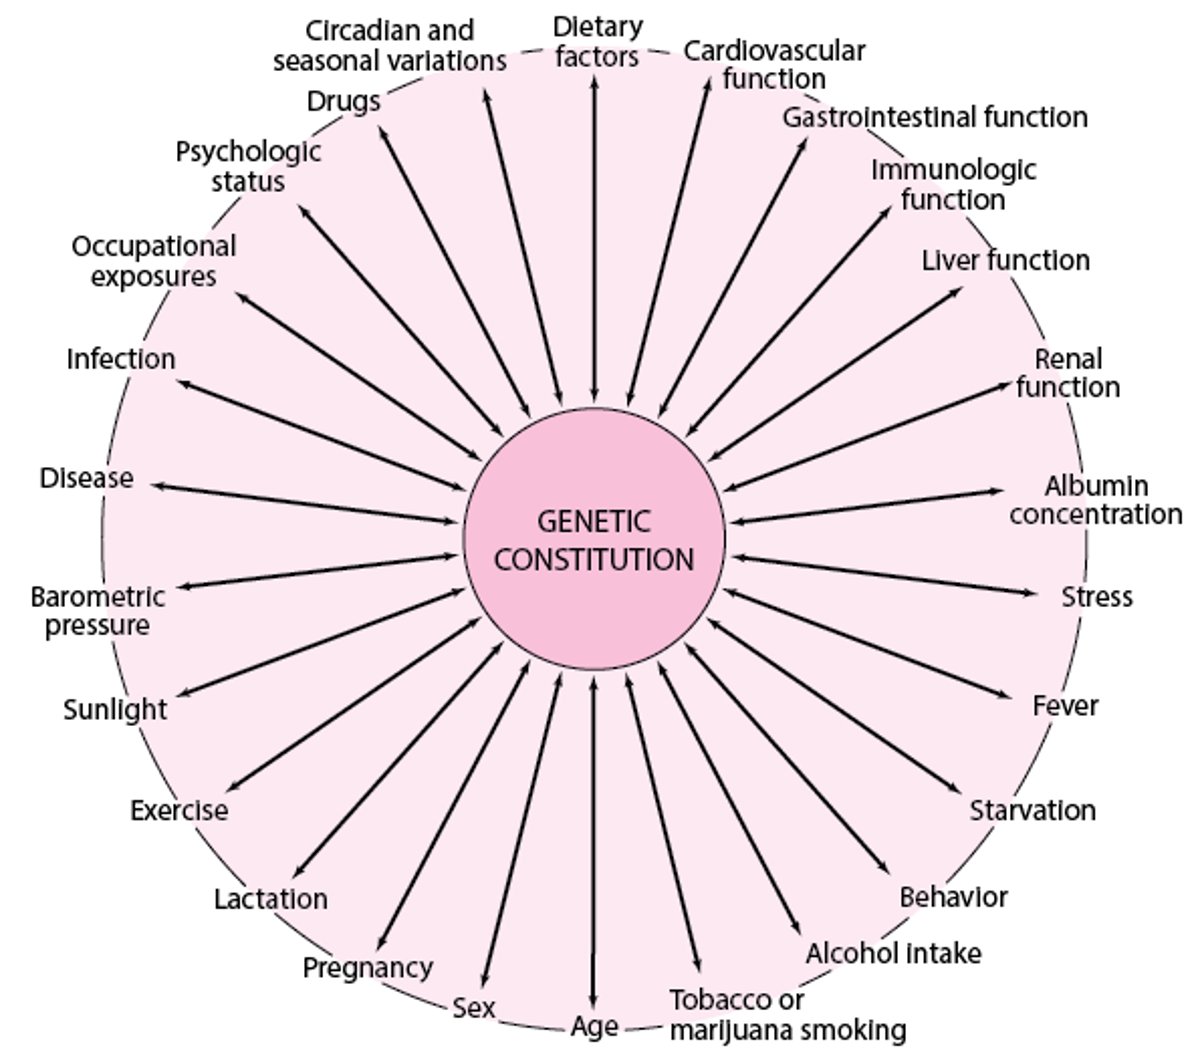 Genetic, environmental, and developmental factors that can interact, causing variations in drug response among patients